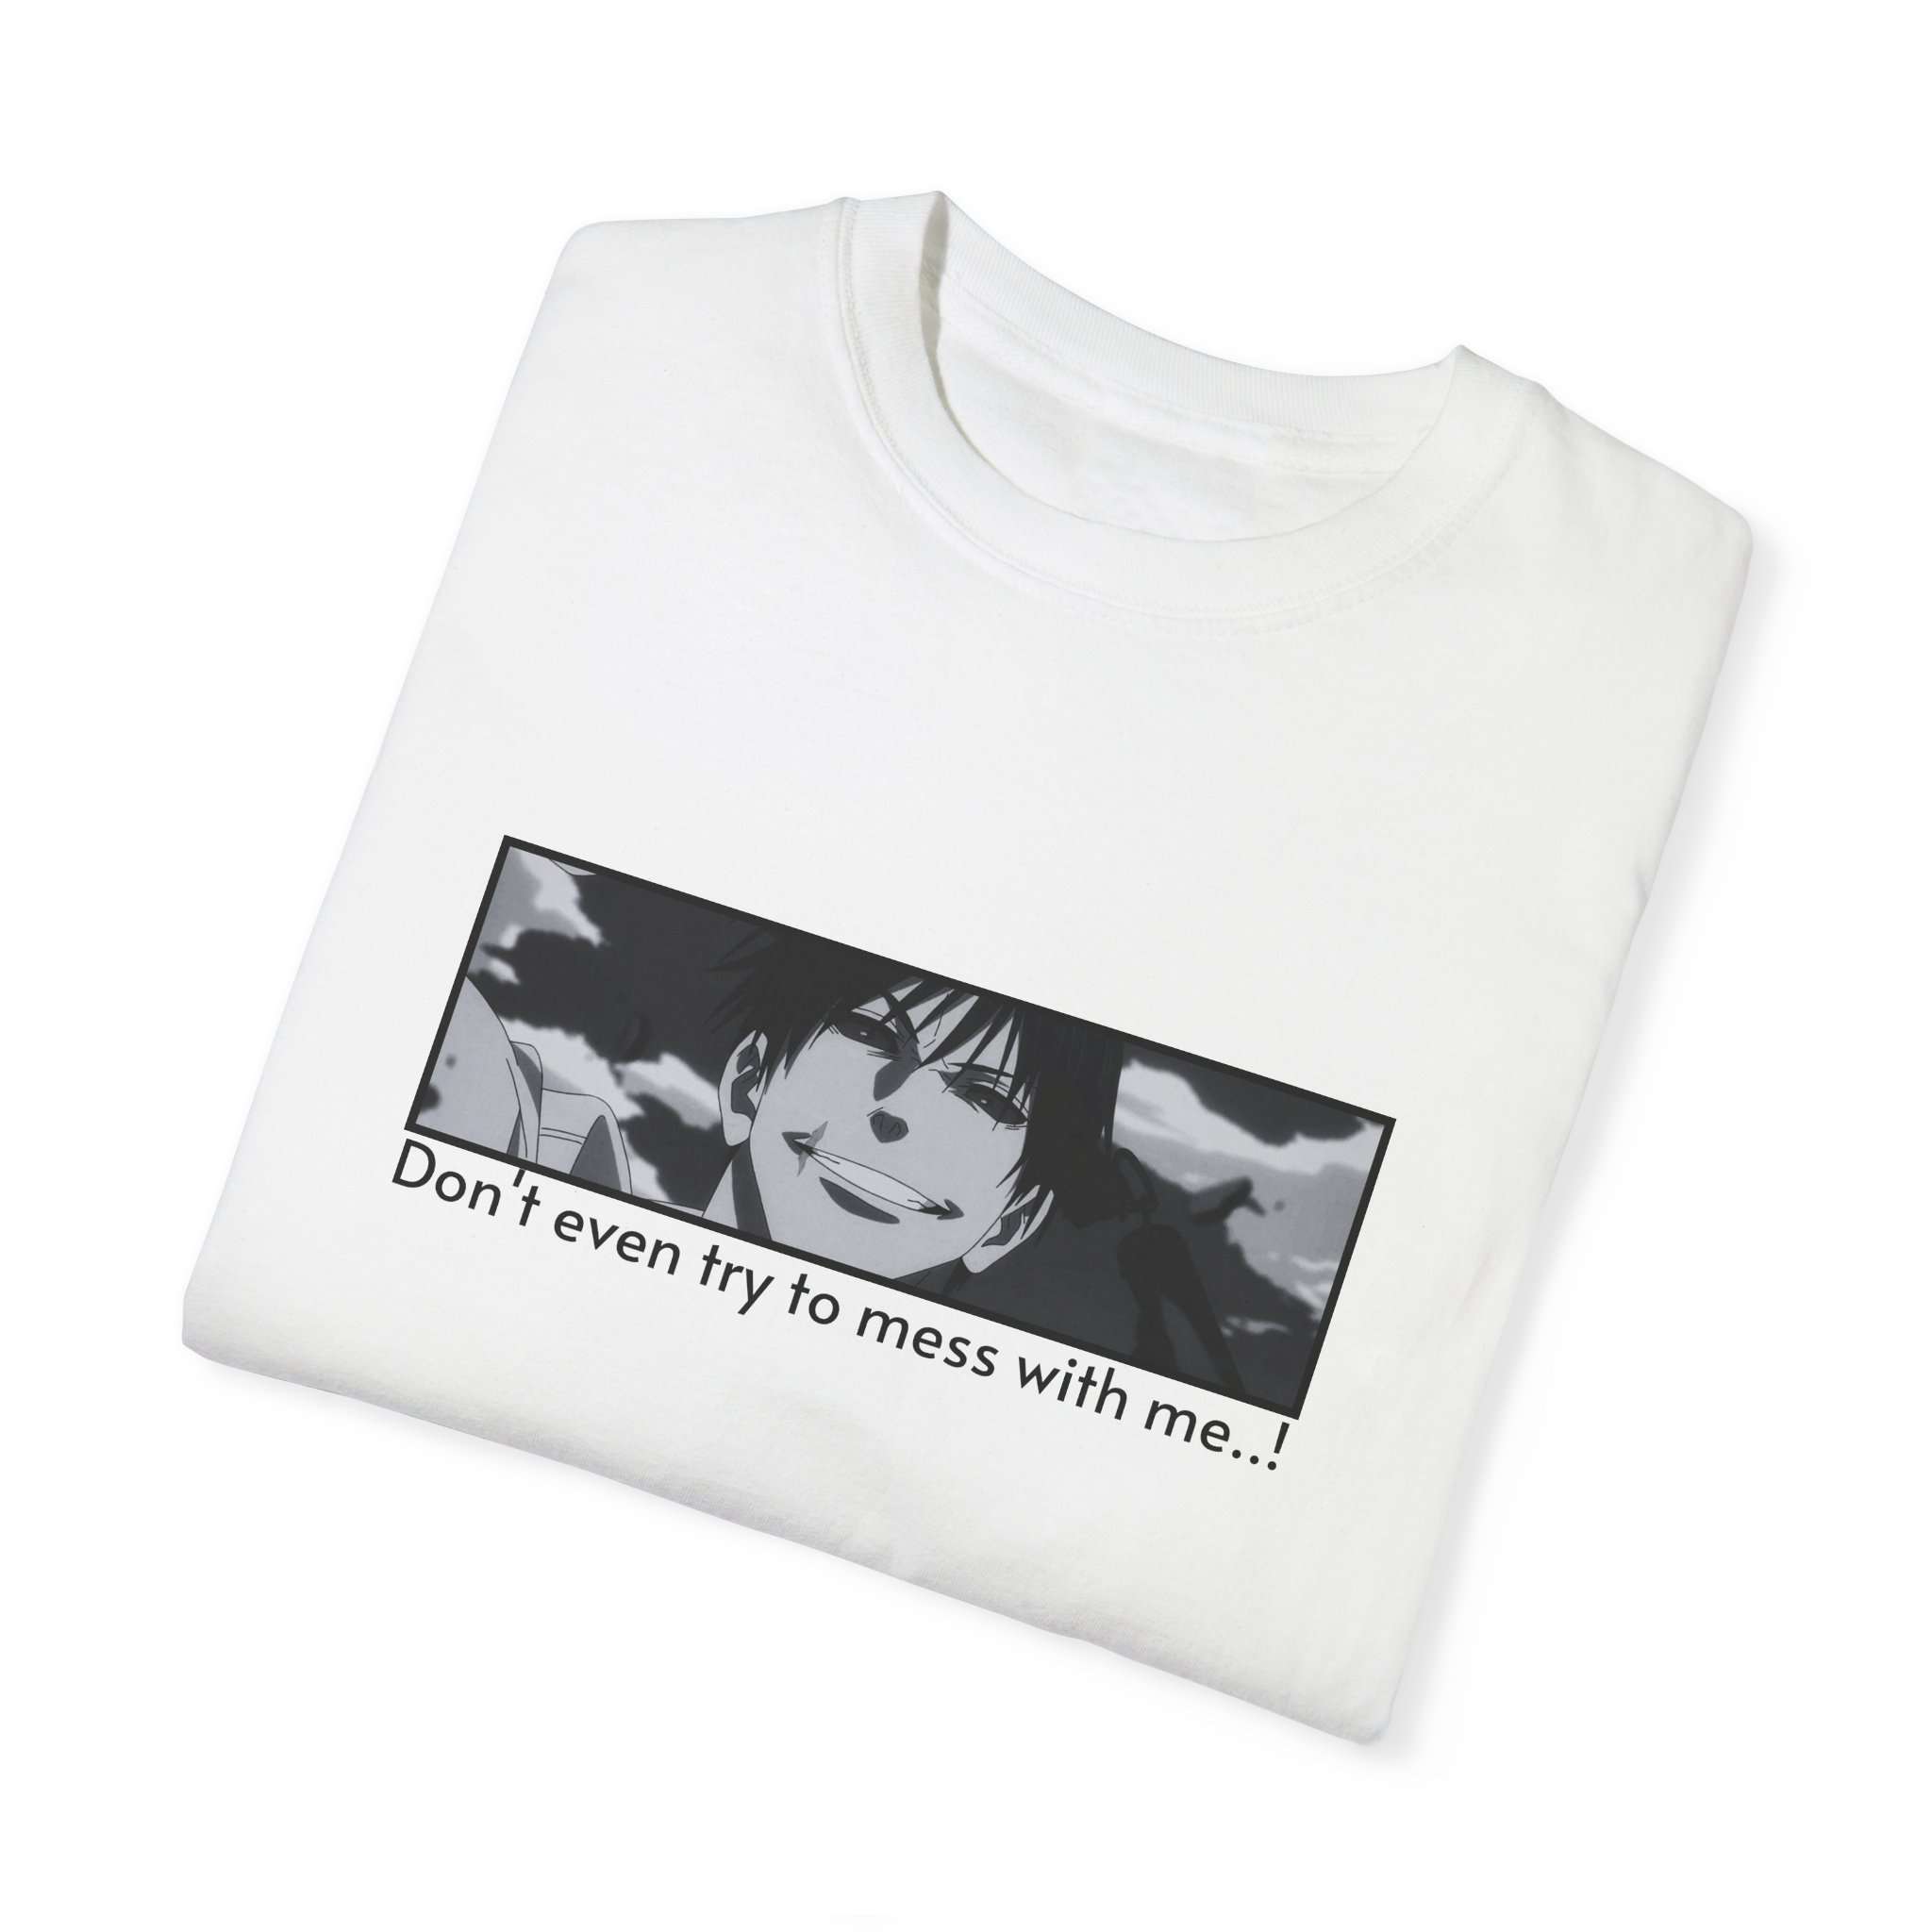 Toji Fushiguro Character Unisex Garment-Dyed T-shirt with 'Don't even try to mess with me.' Quote